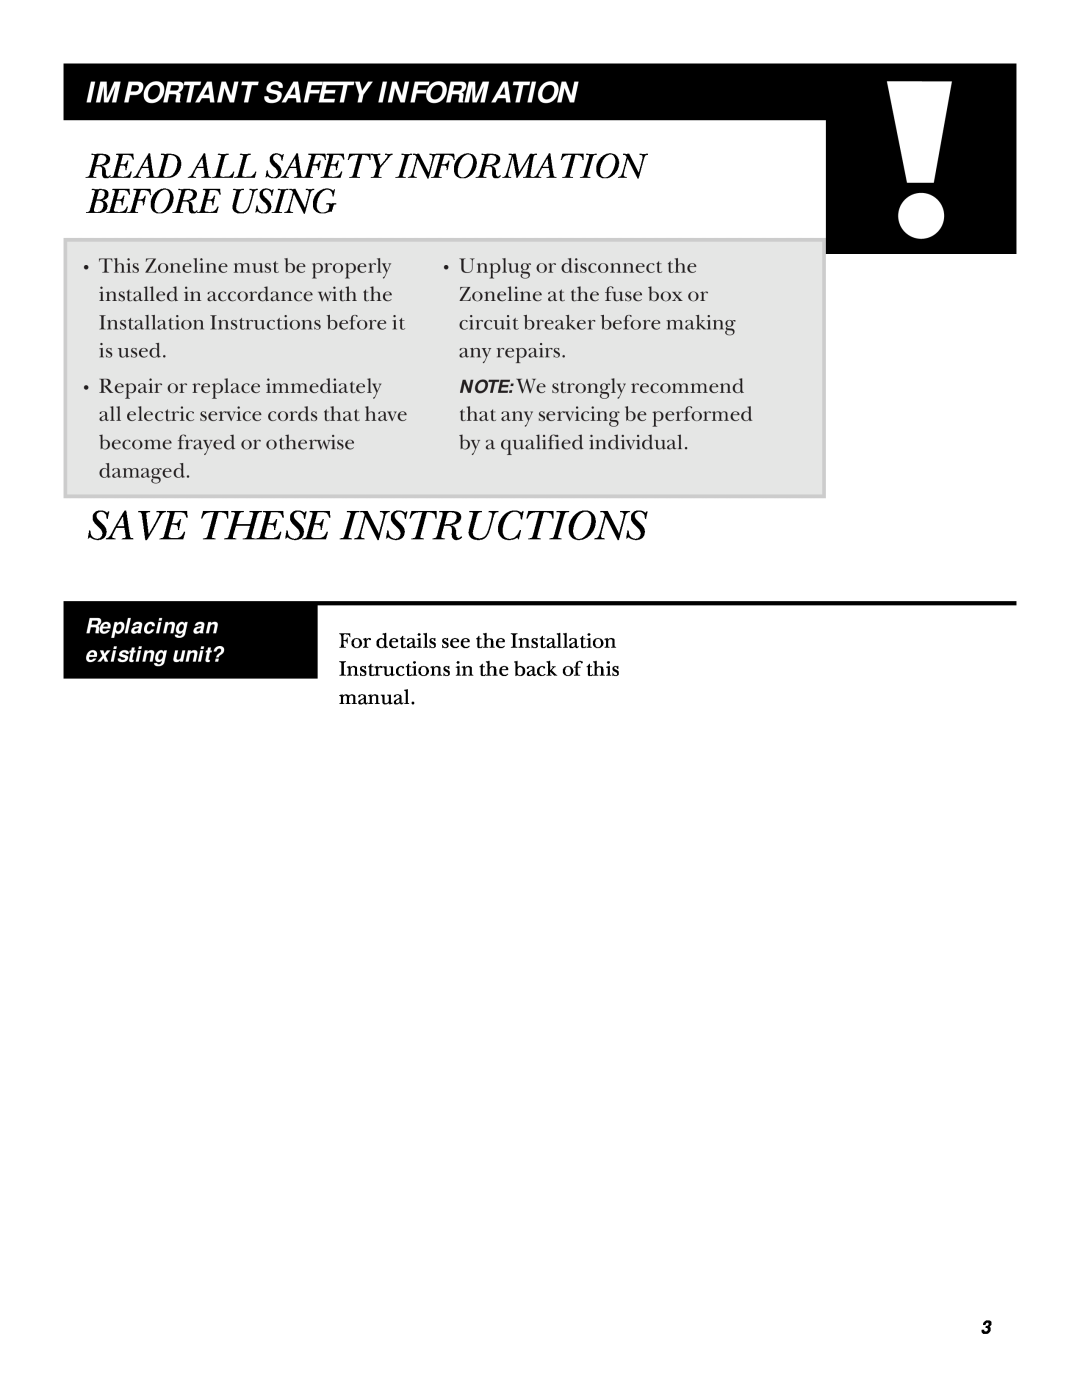 GE 5100 installation instructions Save These Instructions, Important Safety Information, Replacing an existing unit? 